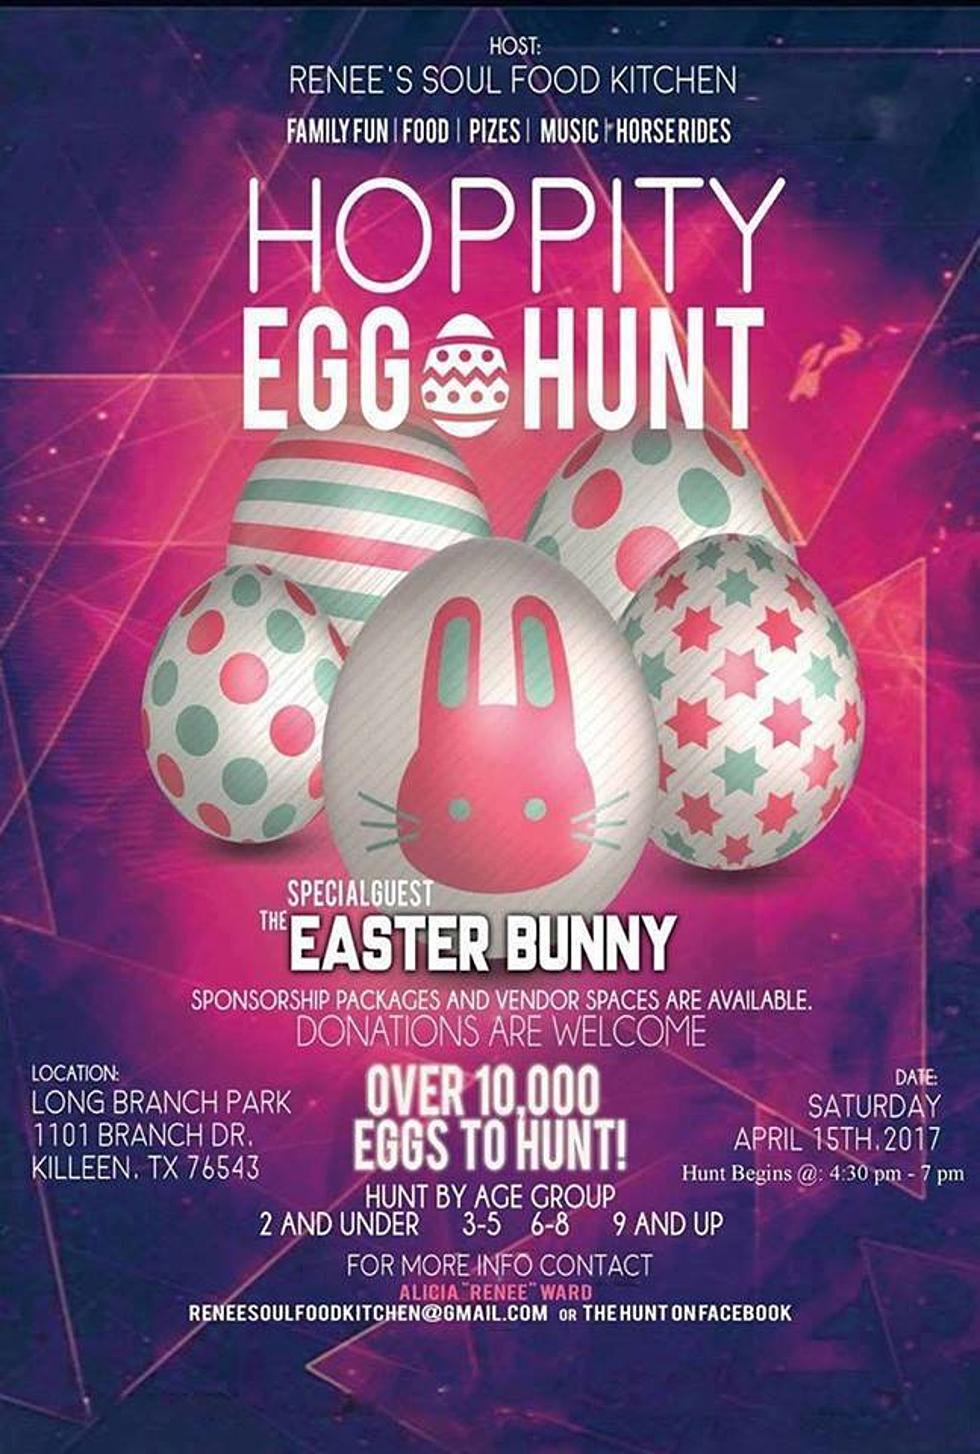 Killeen’s Hoppity Egg Hunt Event Taking Place This Weekend